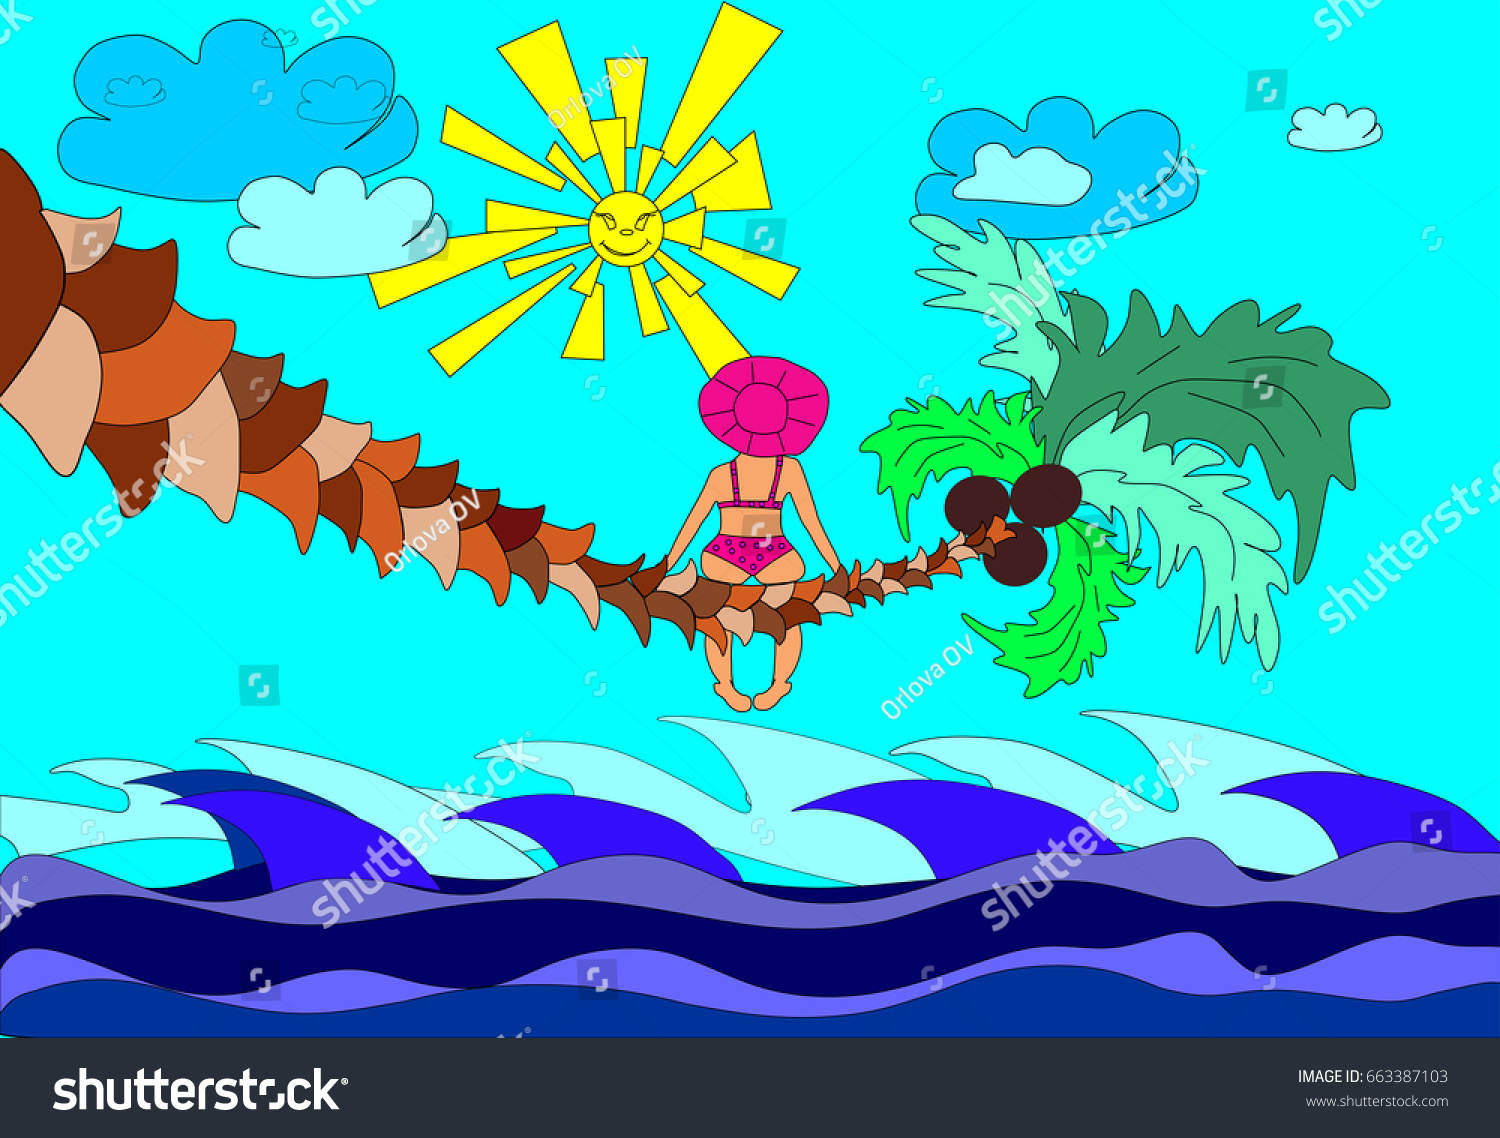 stock-vector-woman-in-swimsuit-sitting-back-on-palm-tree-over-the-sea-663387103.jpg